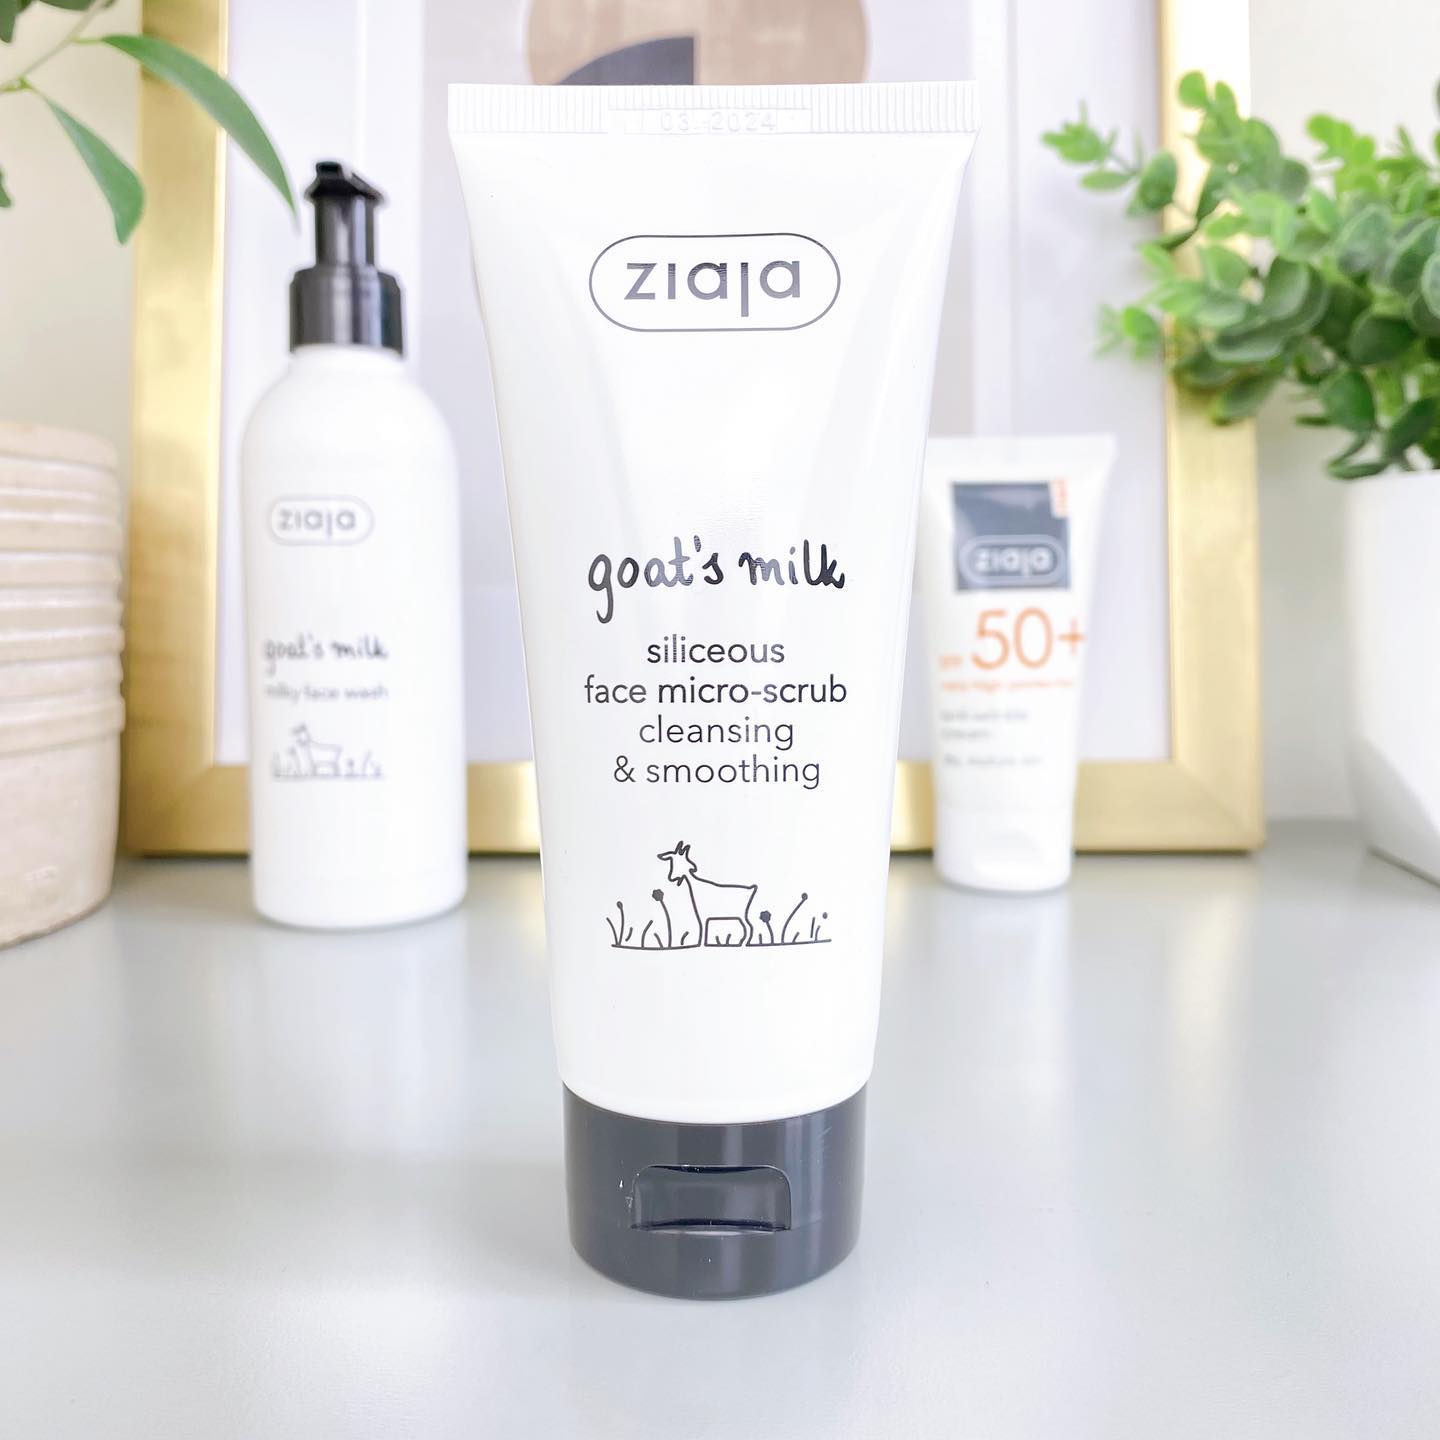  Ziaja Goat's Milk Milky Face Wash - No-rinse cleanser : Beauty  & Personal Care